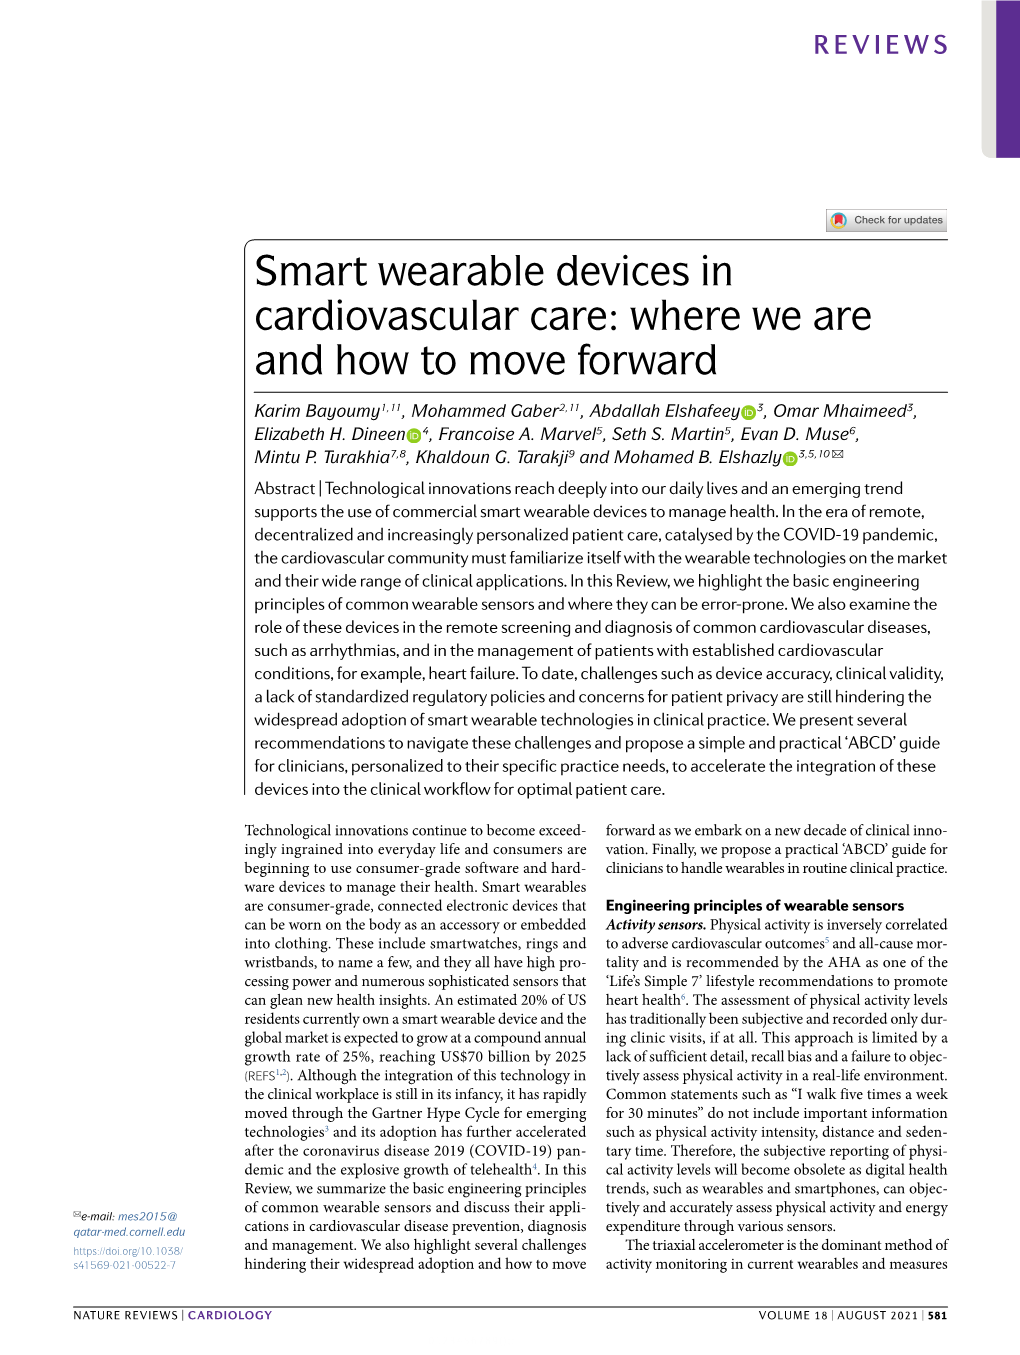 Smart Wearable Devices in Cardiovascular Care: Where We Are and How to Move Forward